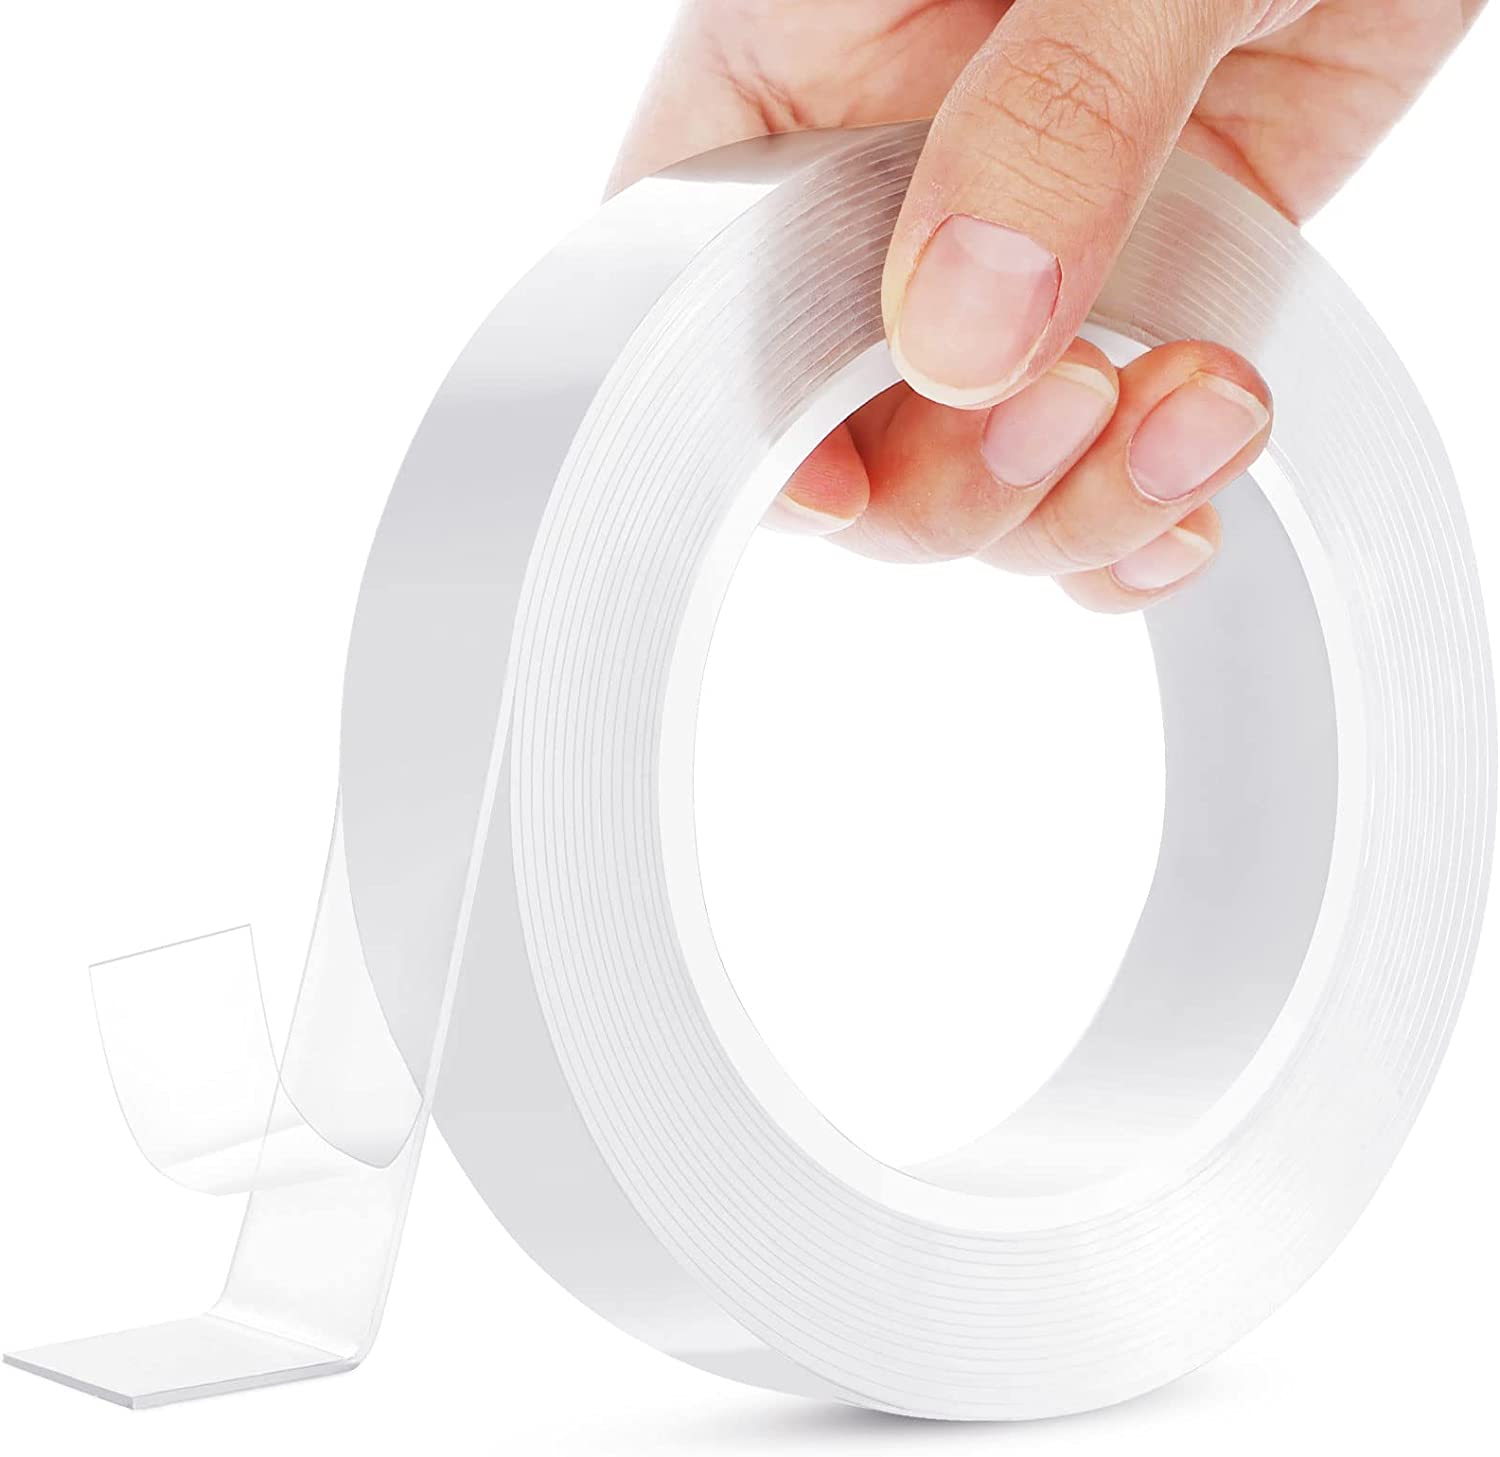 Hitlights Double Sided Tape, Transparent Mounting Tape, Heavy Duty Waterproof Clear Tape, 16ft